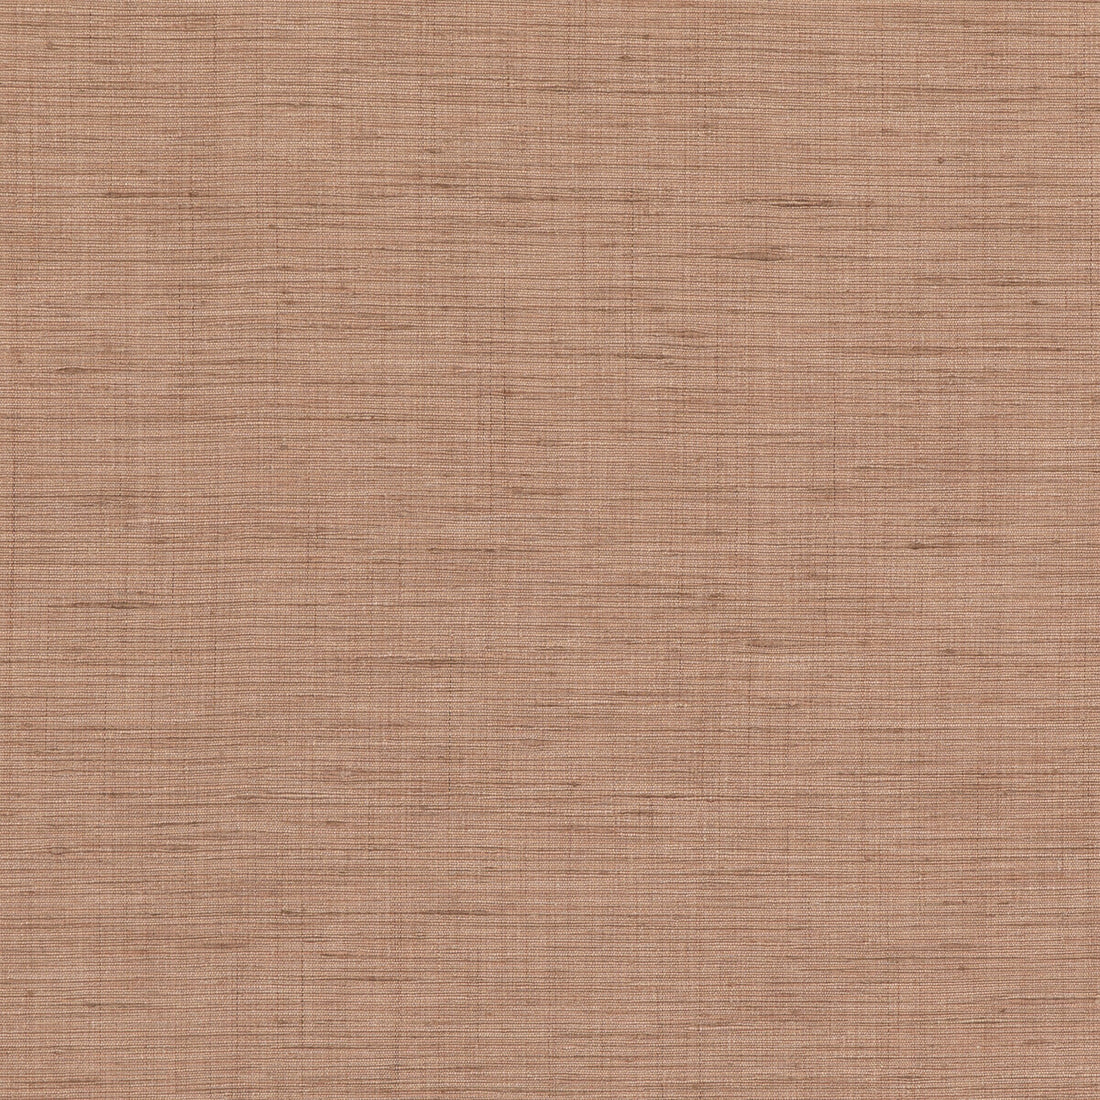 Belgrave fabric in blush color - pattern PF50477.440.0 - by Baker Lifestyle in the Pavilion - Blegrave Notebook collection